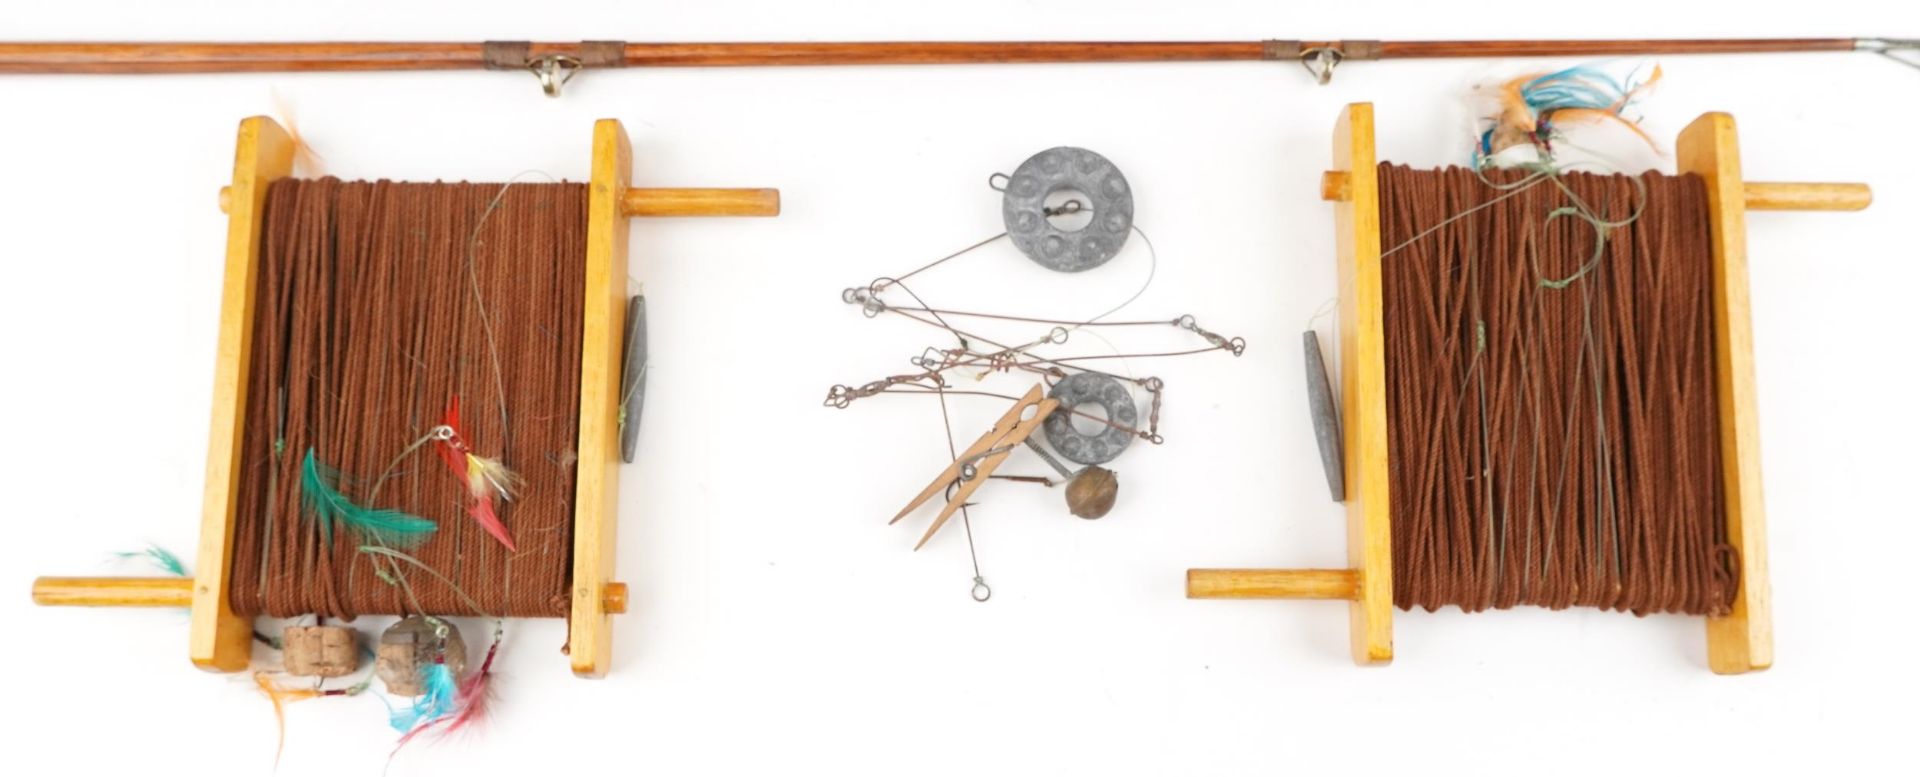 Vintage sporting interest fishing tackle including two reels, two hand lines and flies - Image 5 of 6